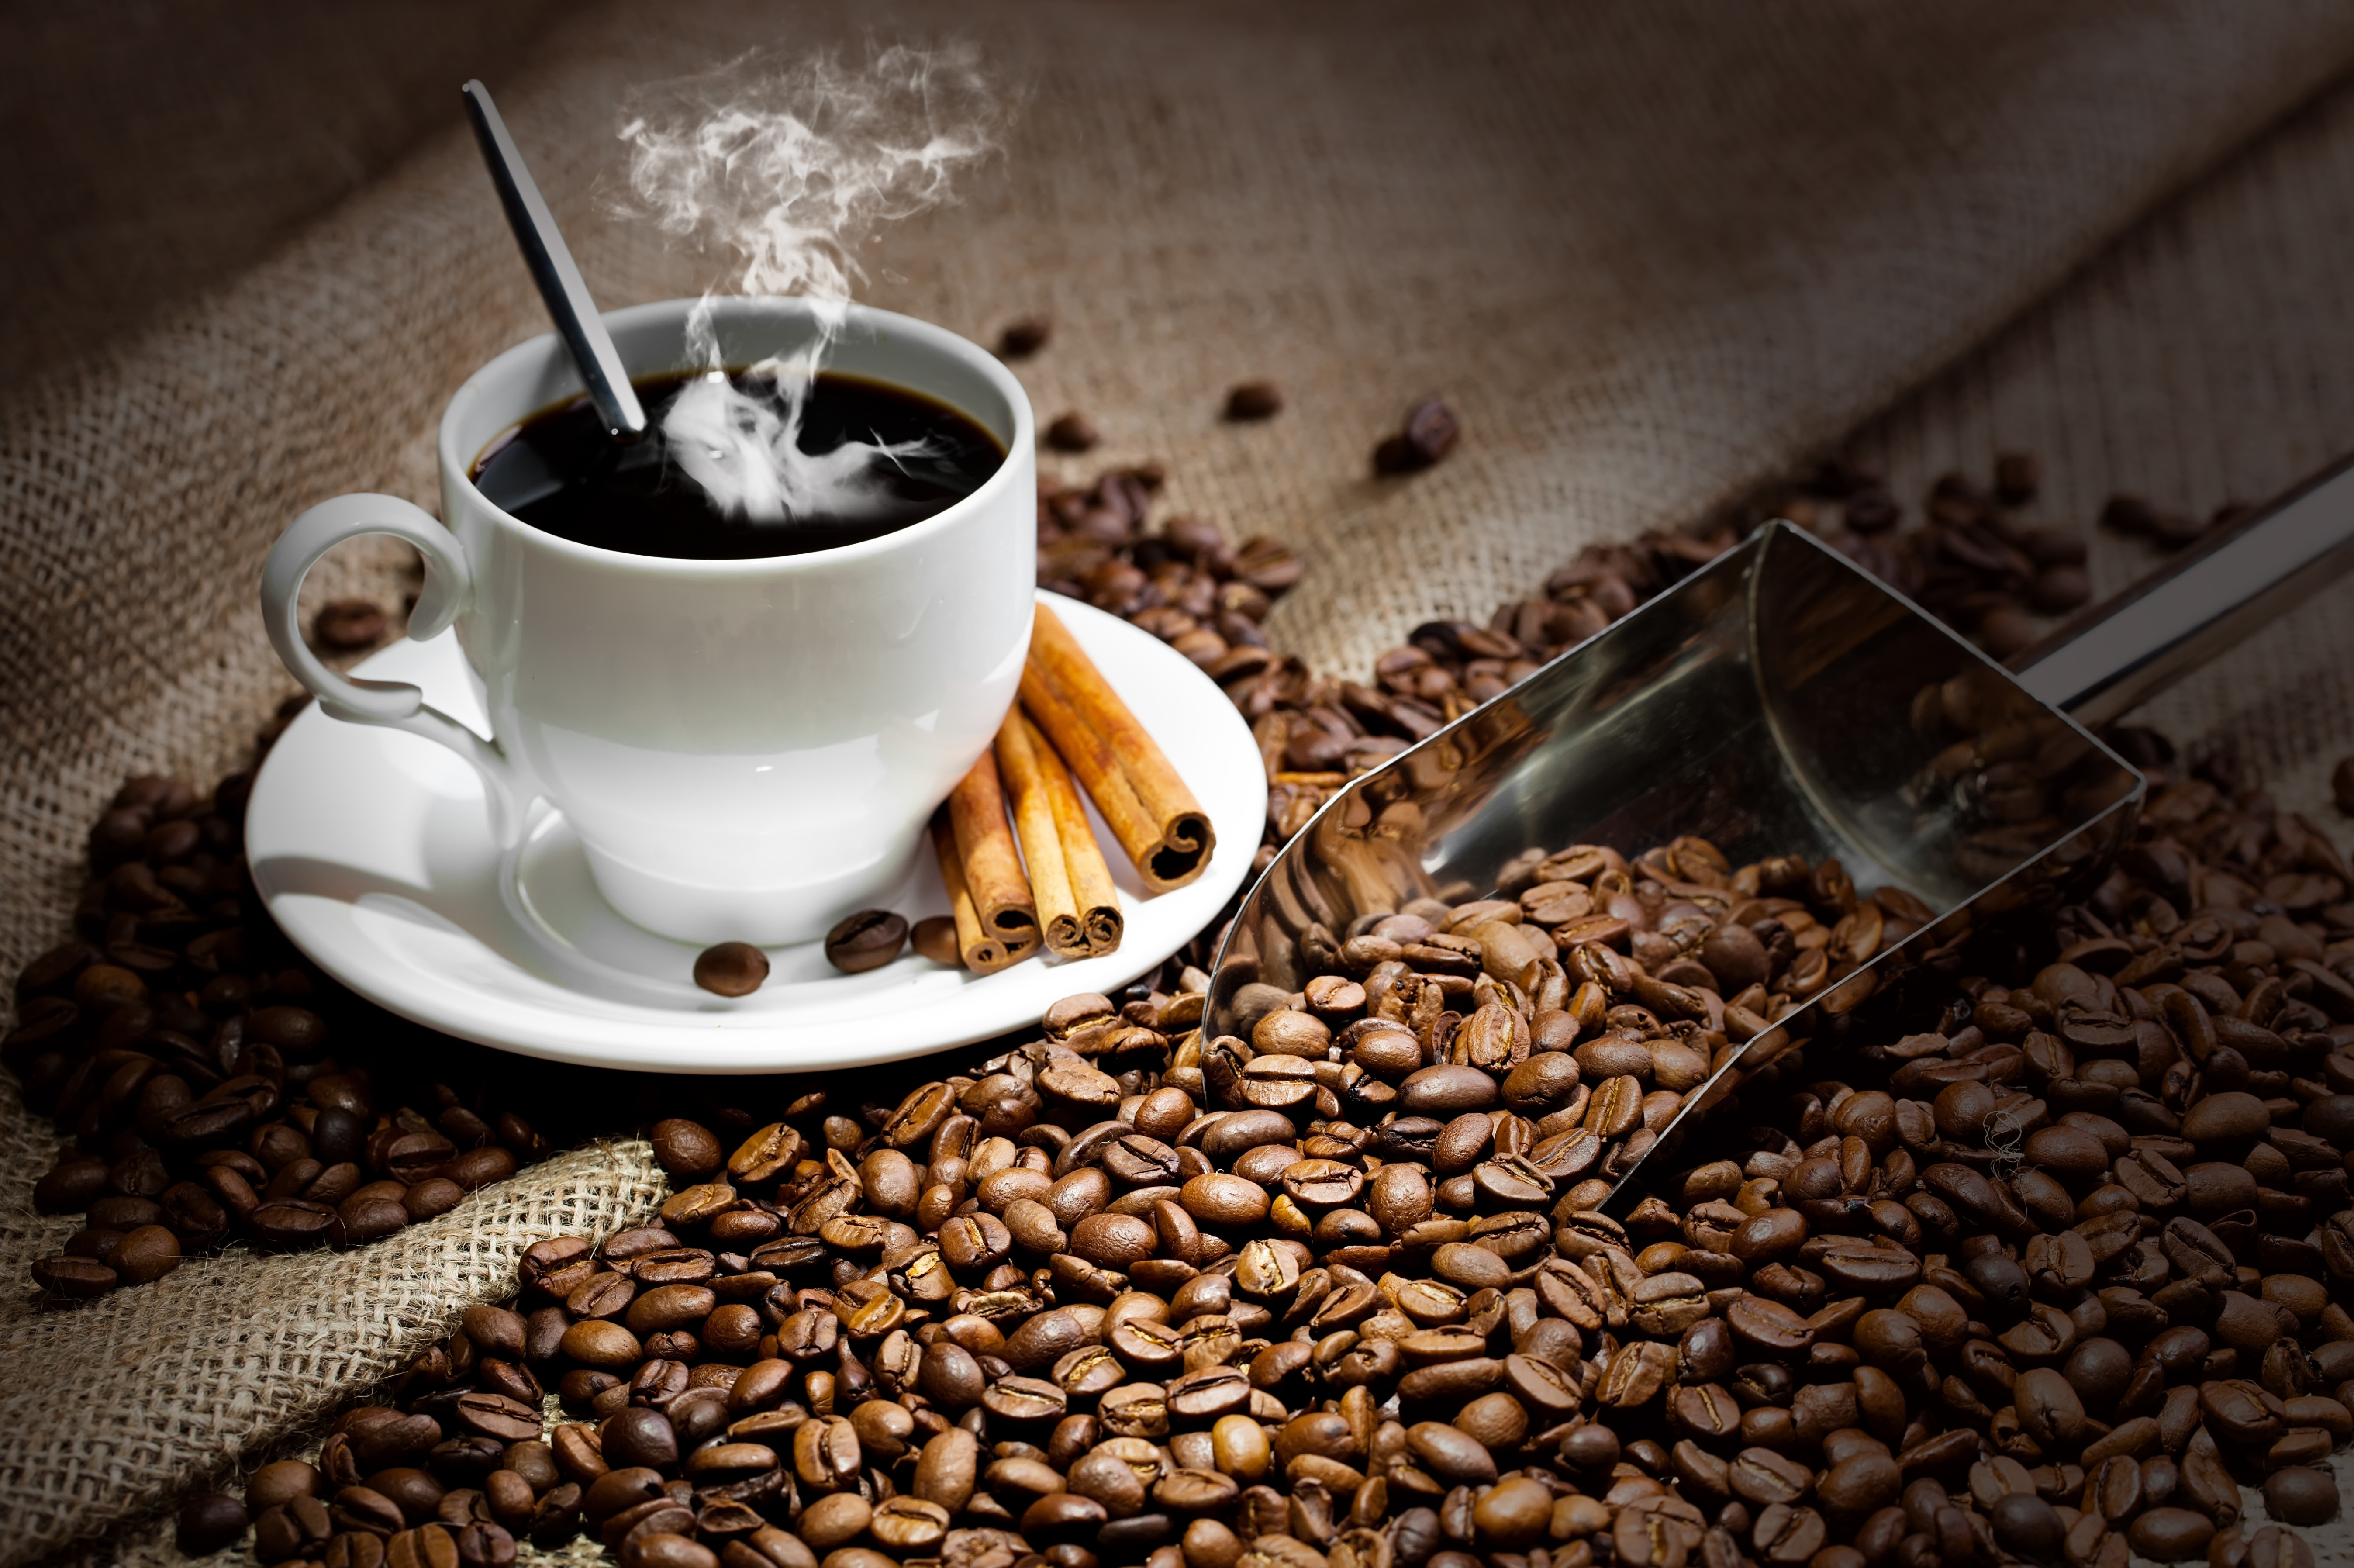 760+ 4K Coffee Wallpapers | Background Images